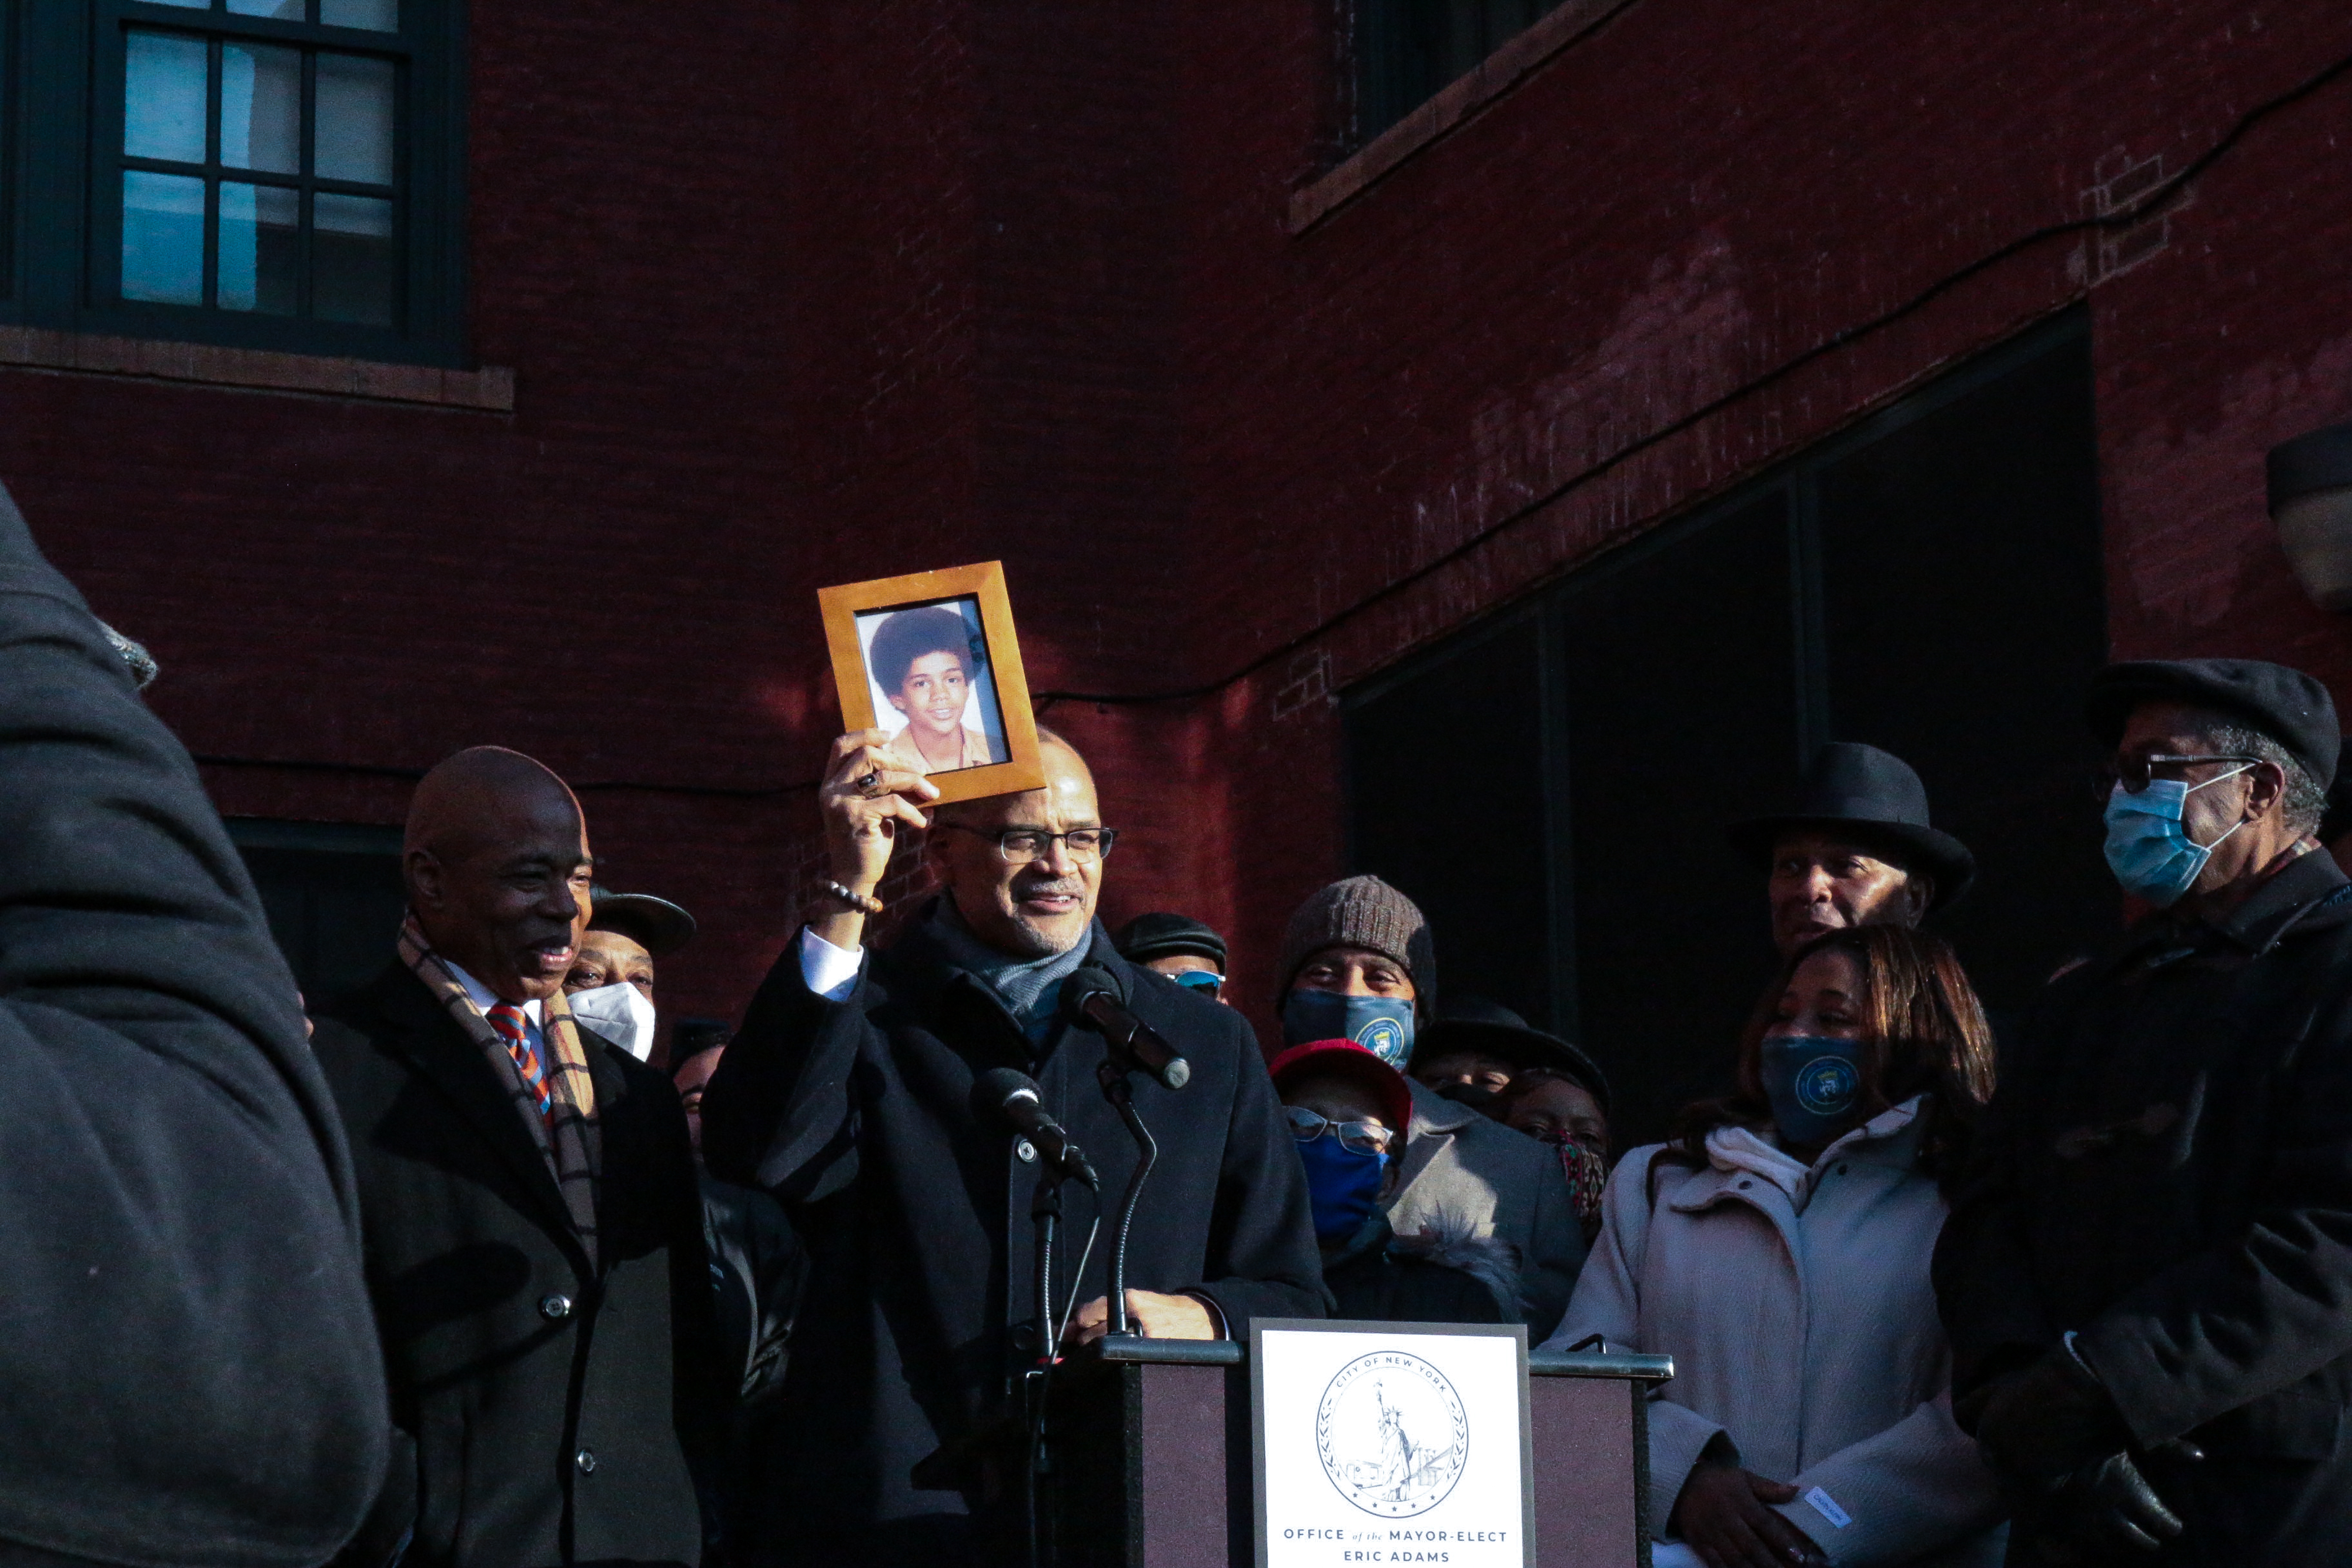 A man at a lectern holds up a framed photo.